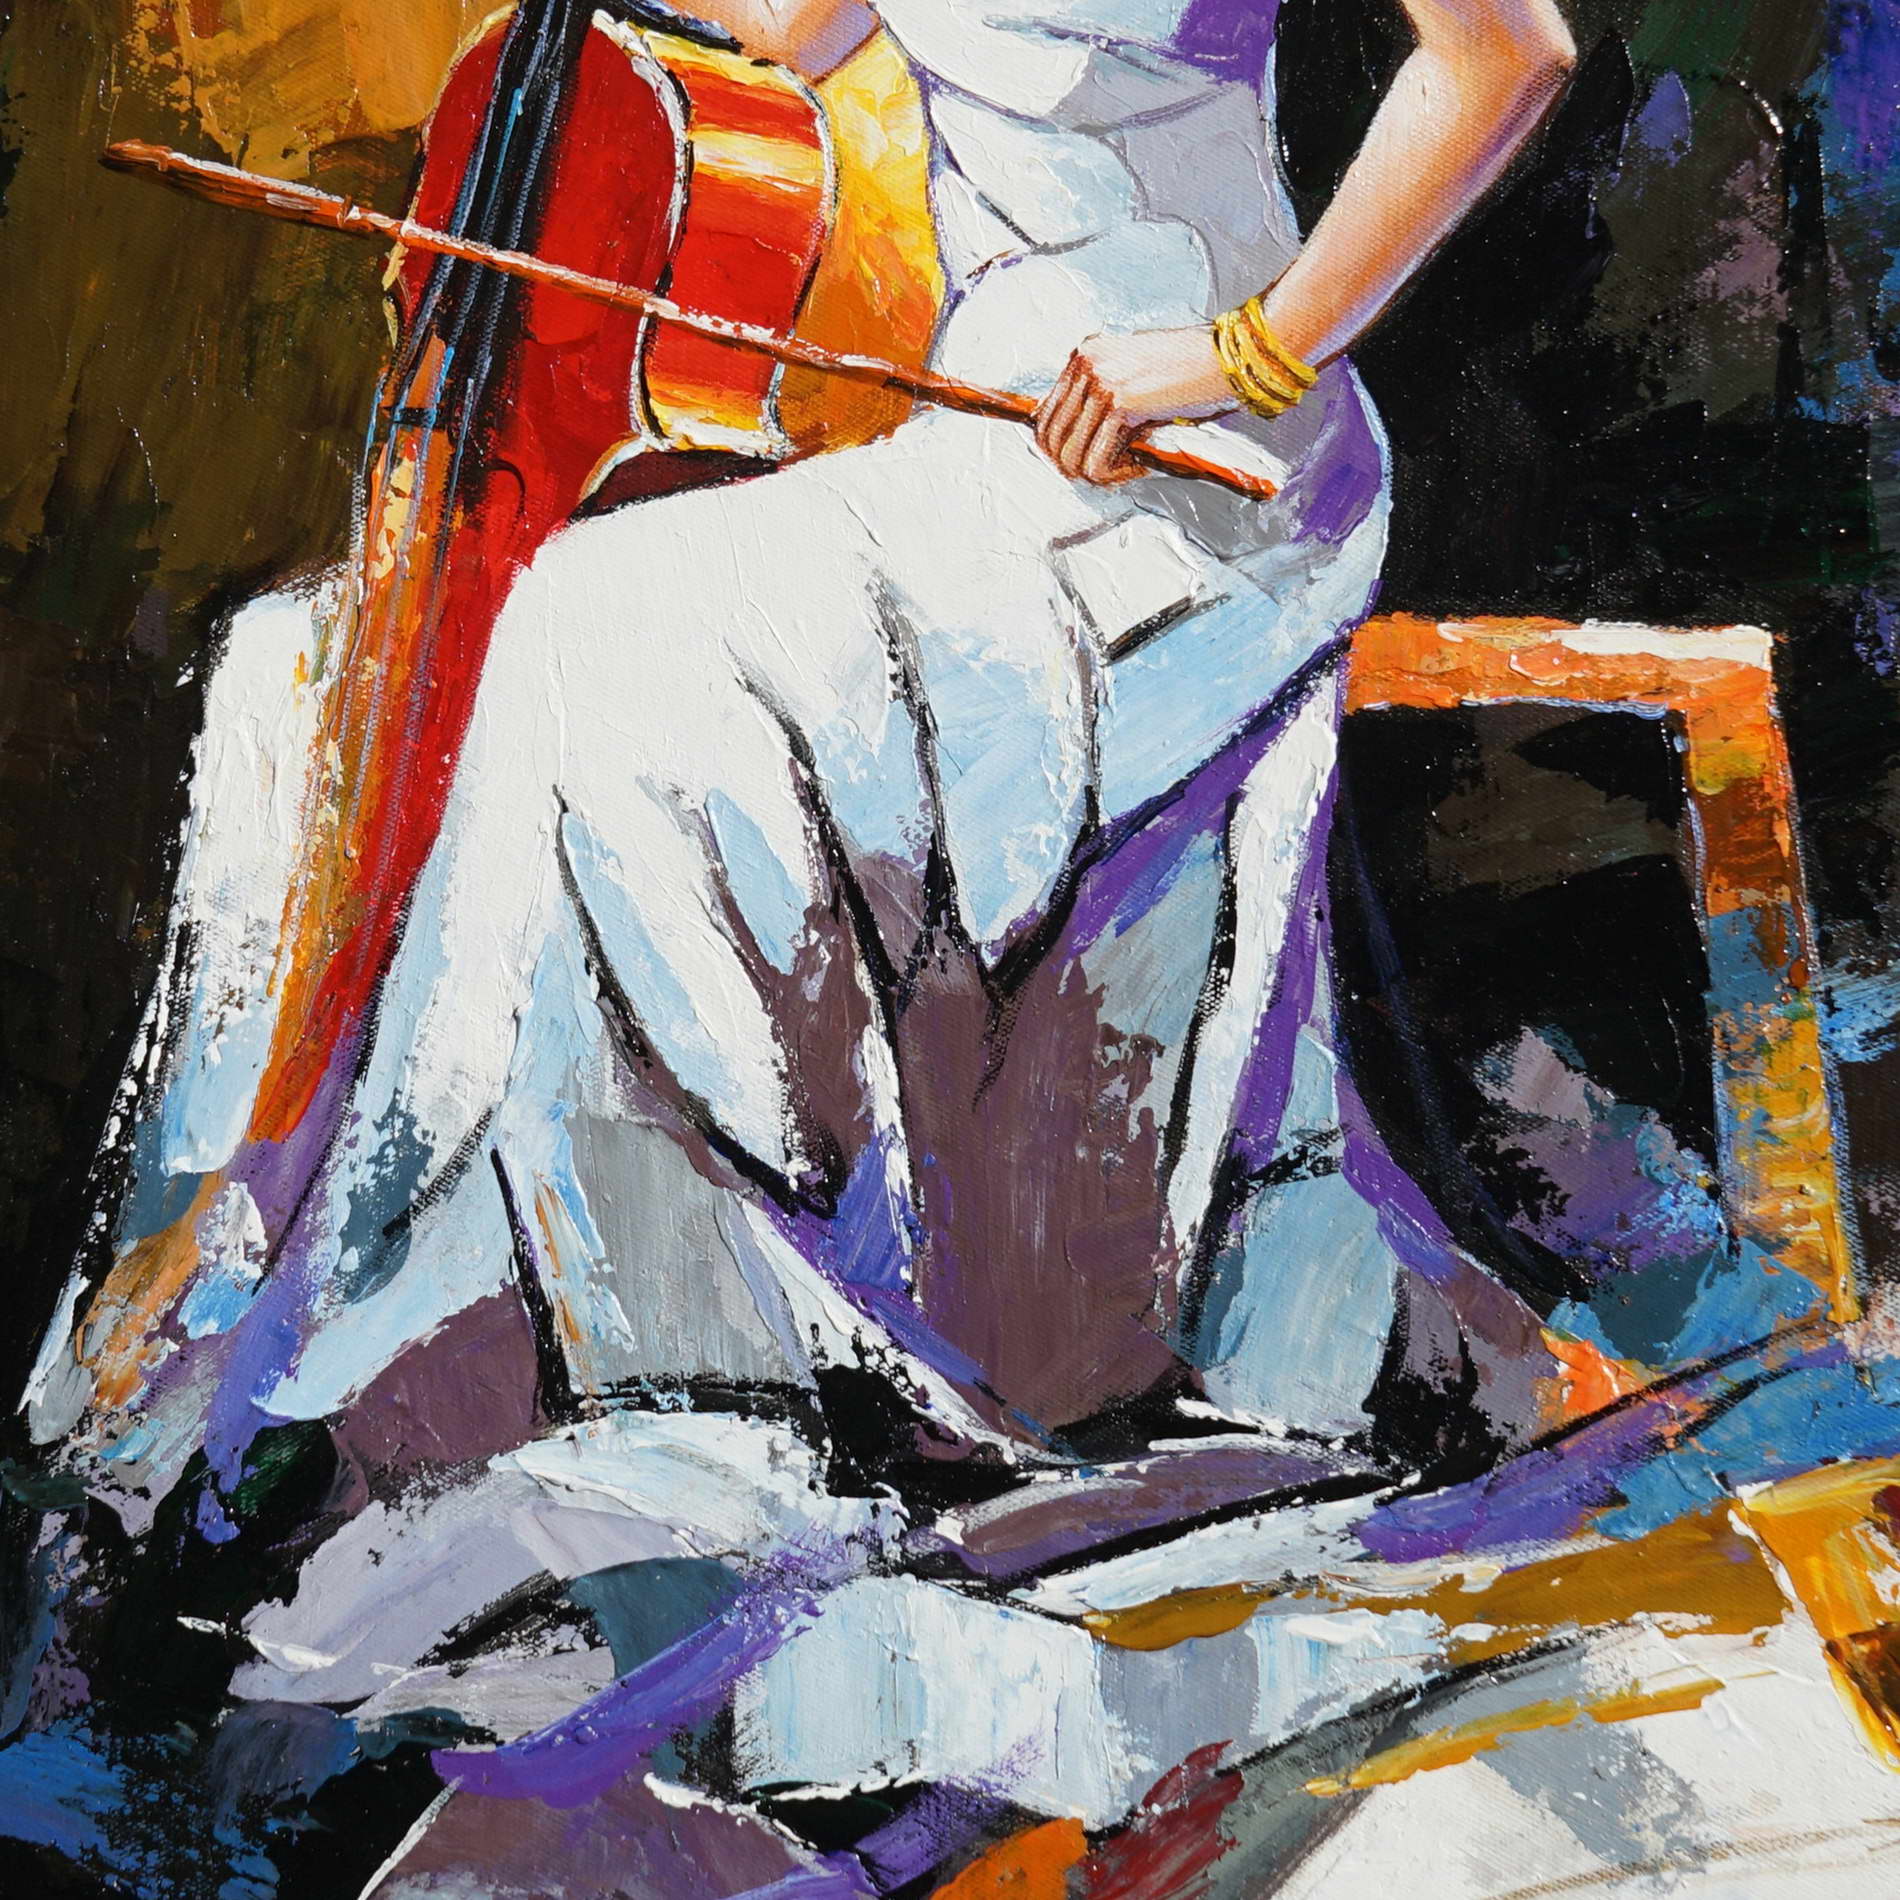 Hand painted Woman with Cello 50x70cm